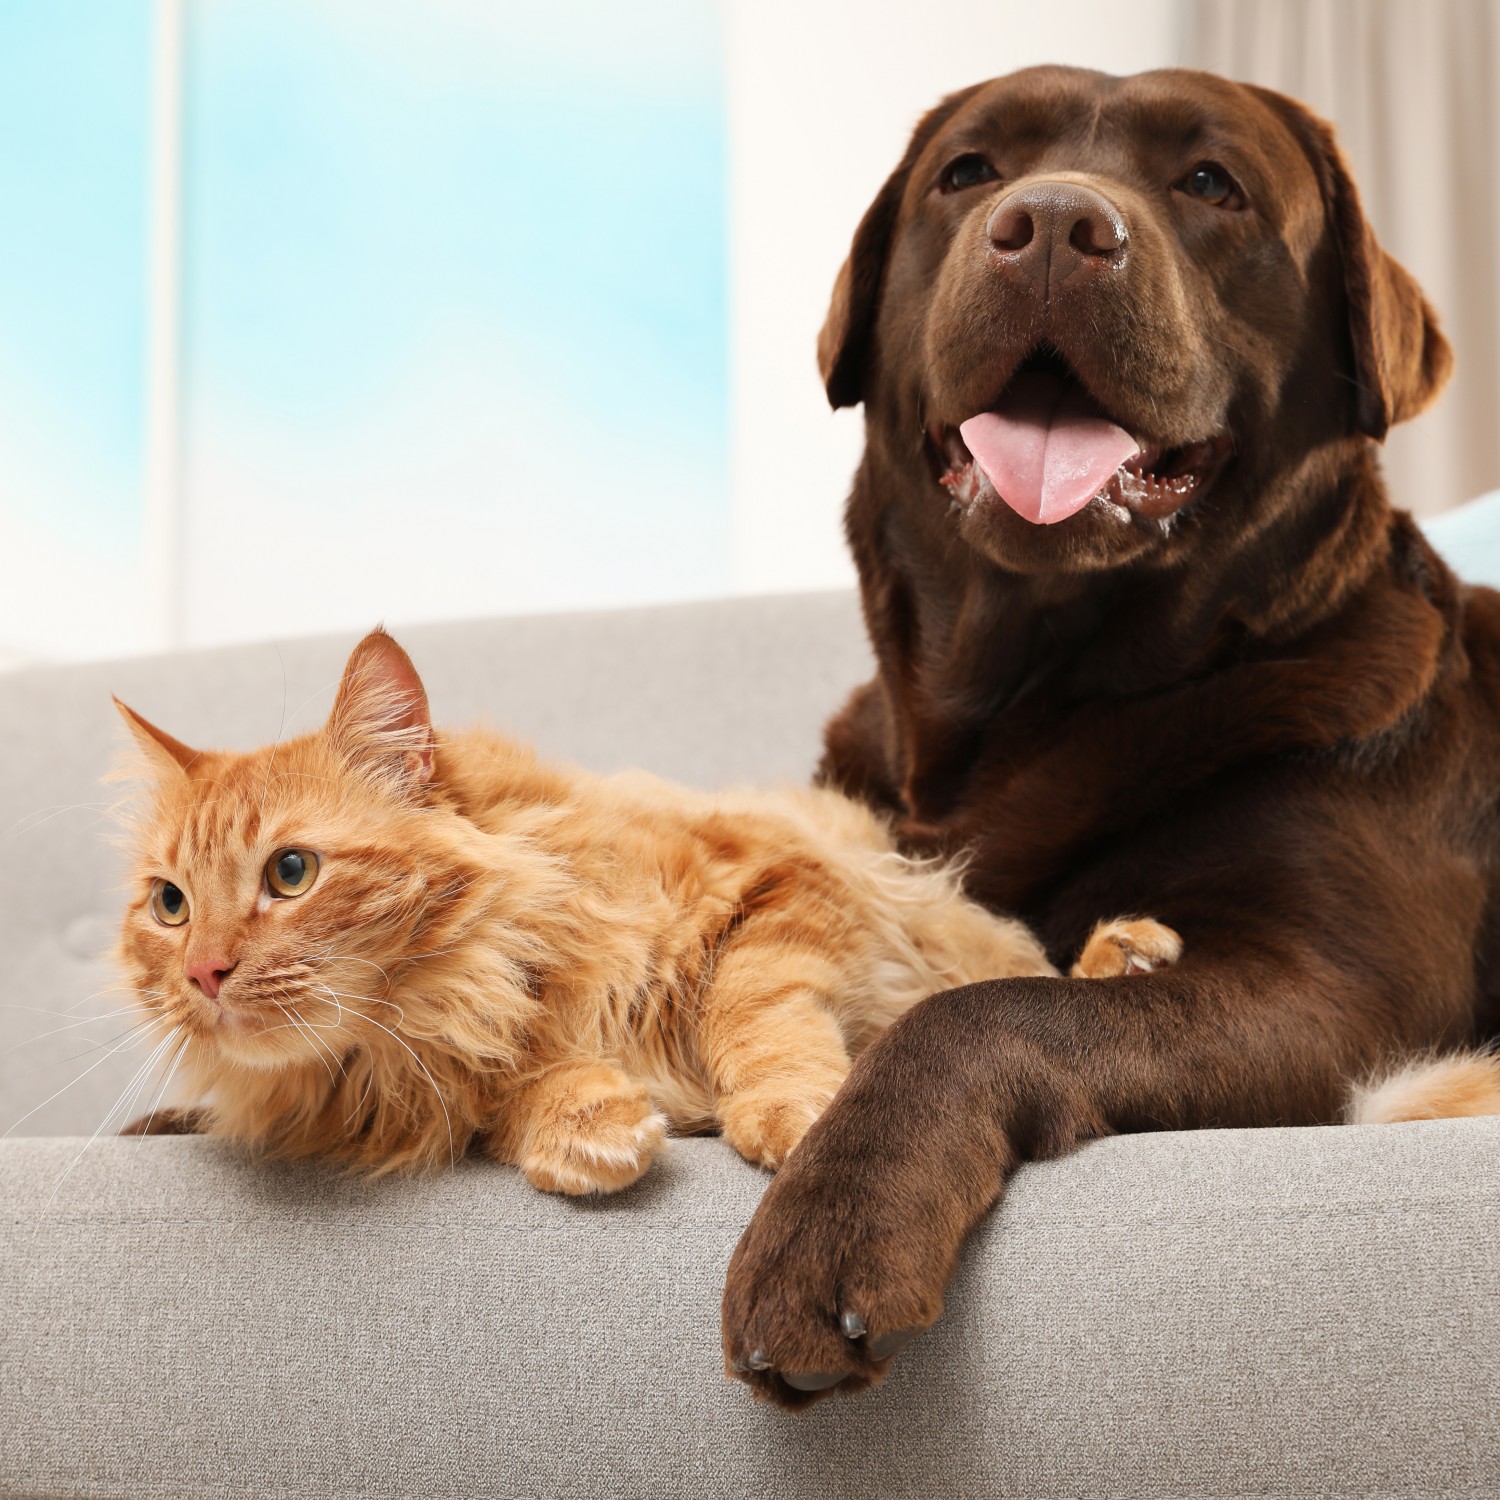 cat and dog on couch